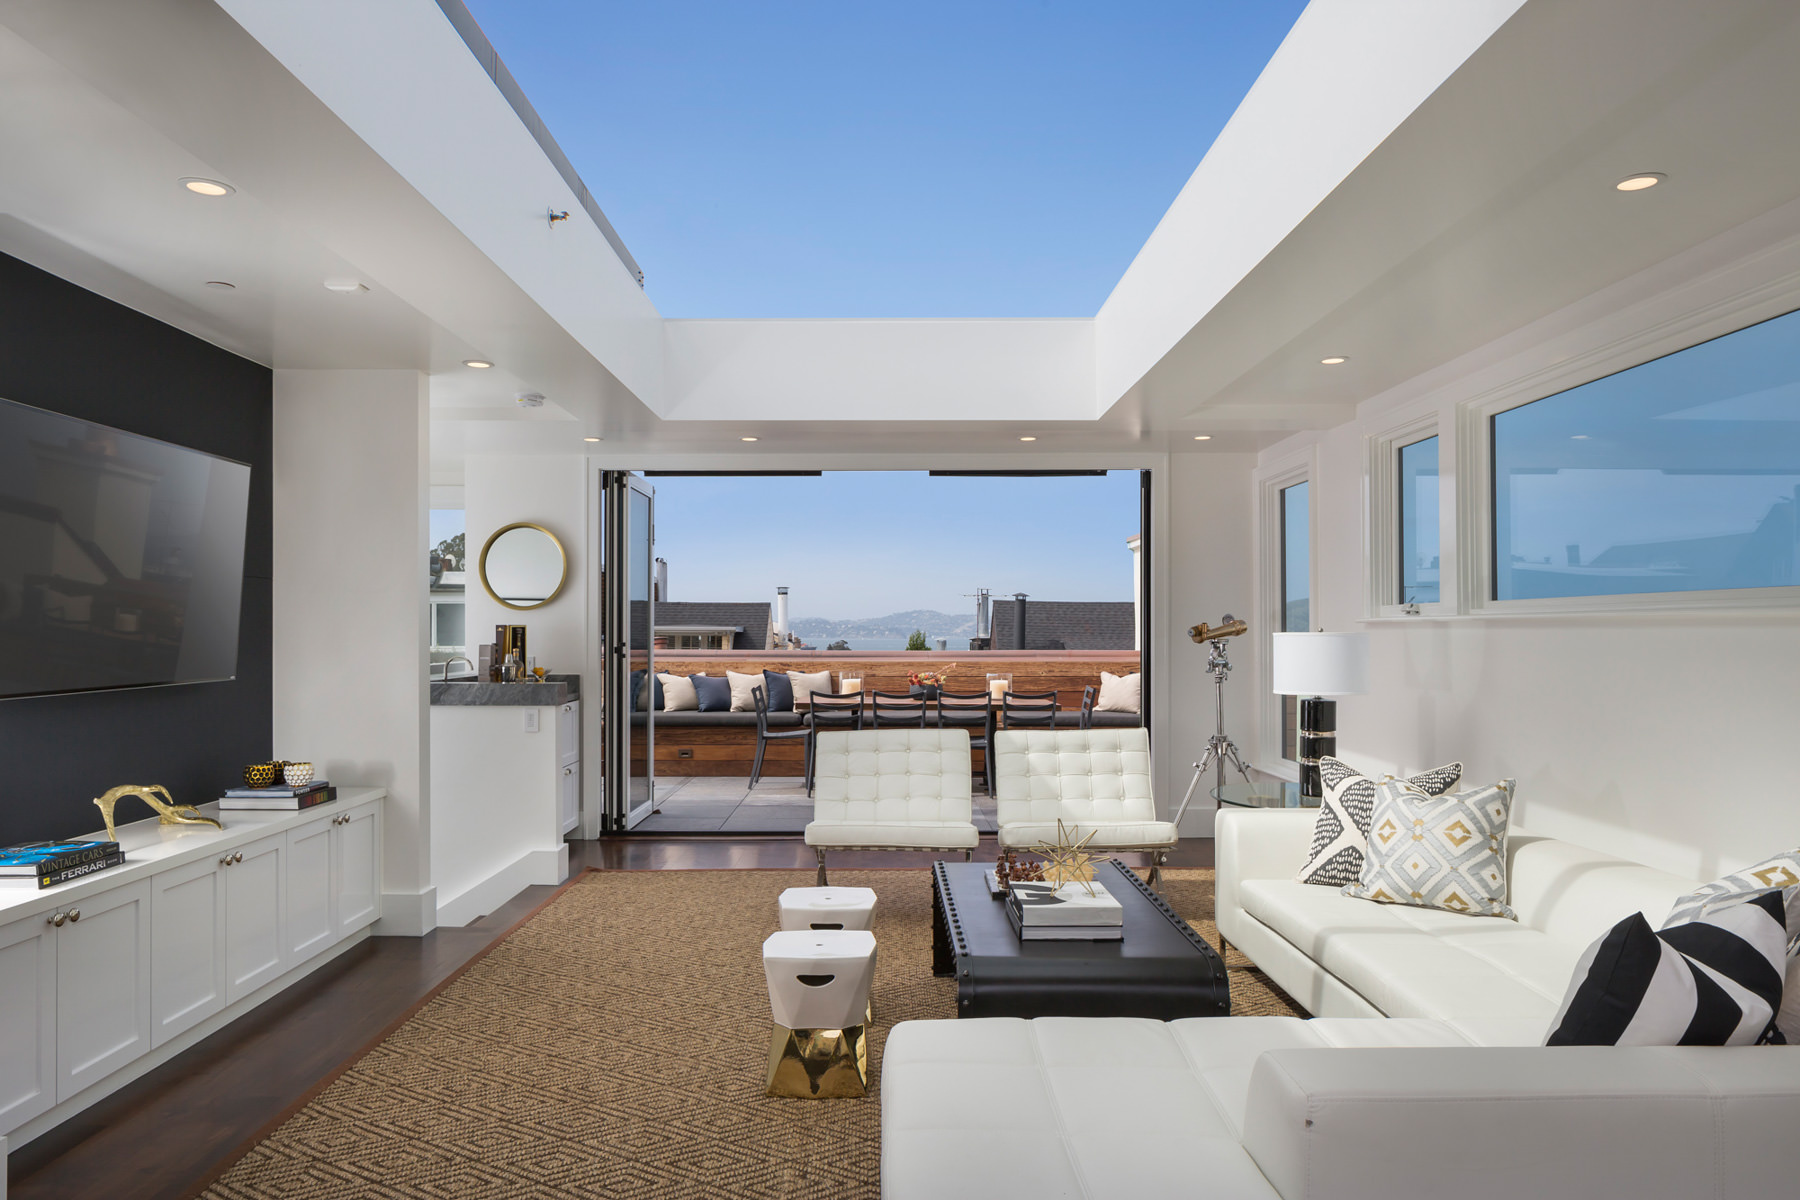 Rooftop lounge with a retractable glass ceiling in San Francisco, CA.